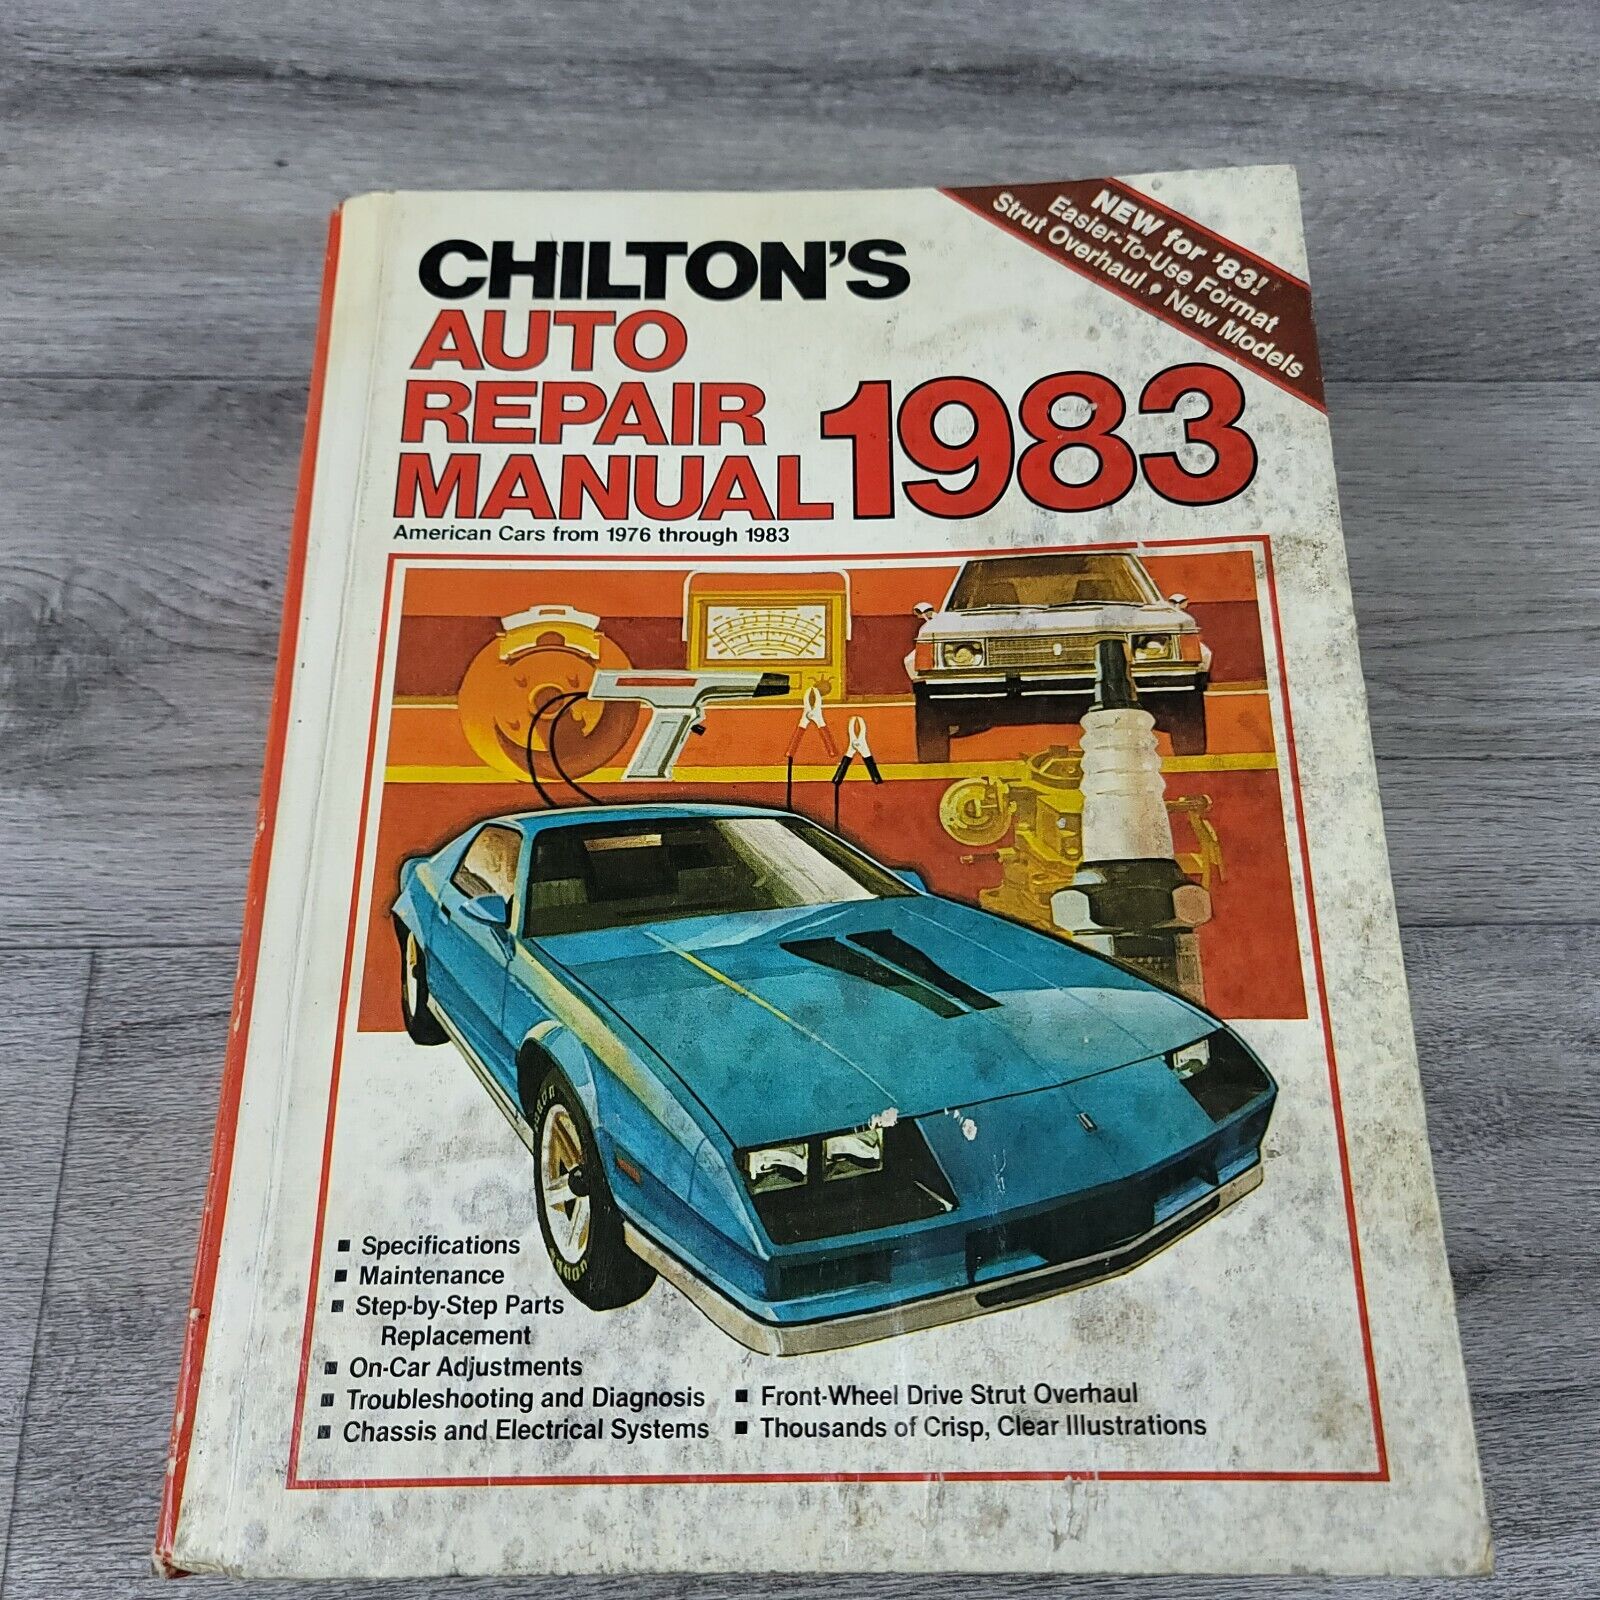 Chilton's Auto Repair Manual 1983 American Cars 1976 - 1983 Hardcover Ford GM +